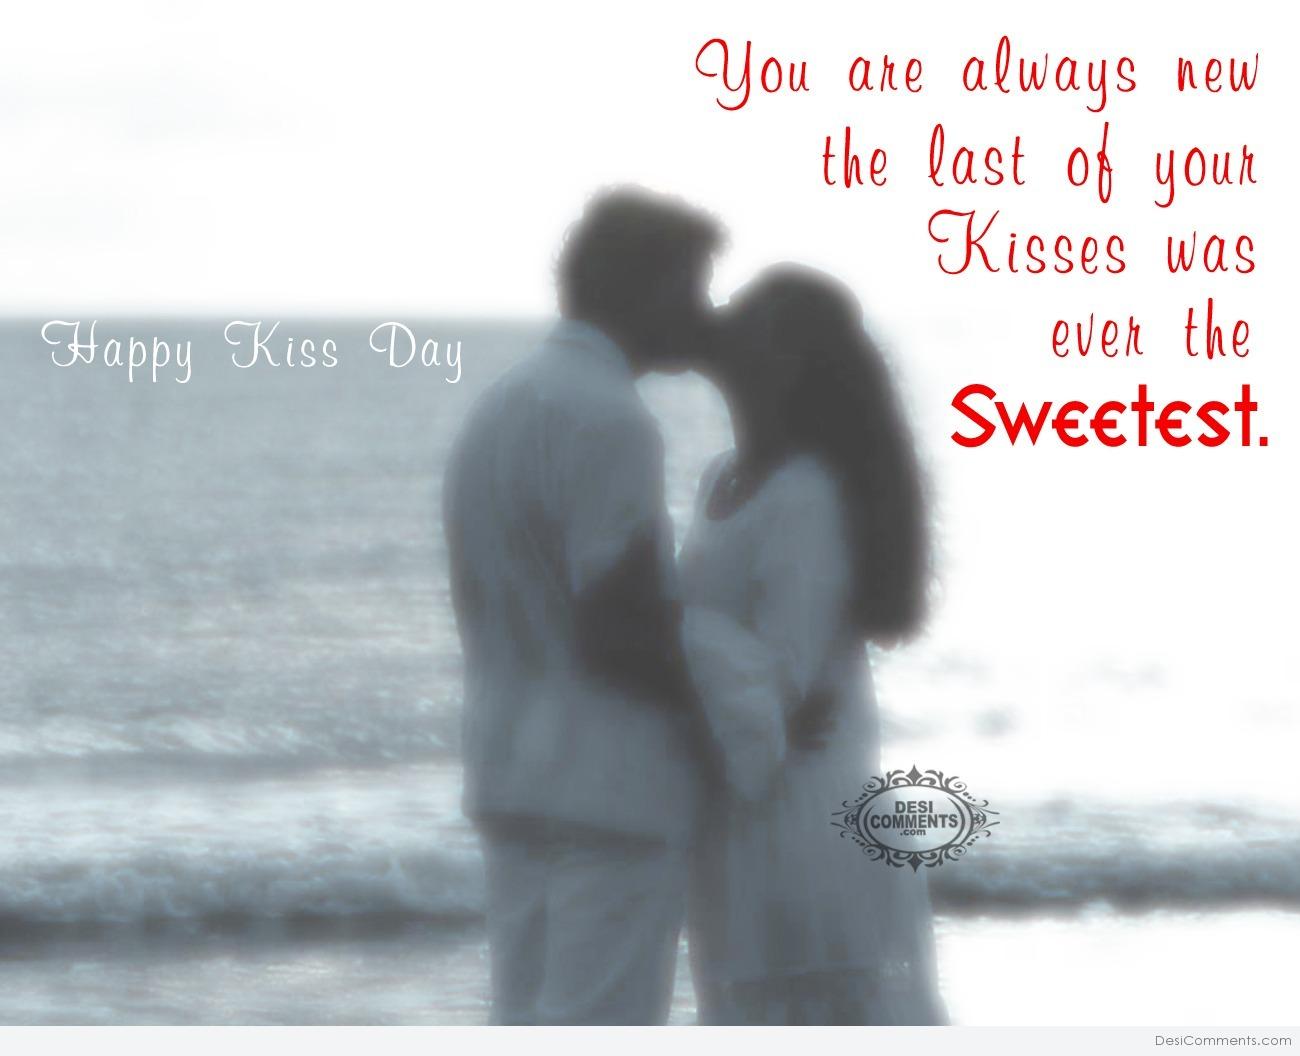 Happy Kiss Day – You are always new… - DesiComments.com